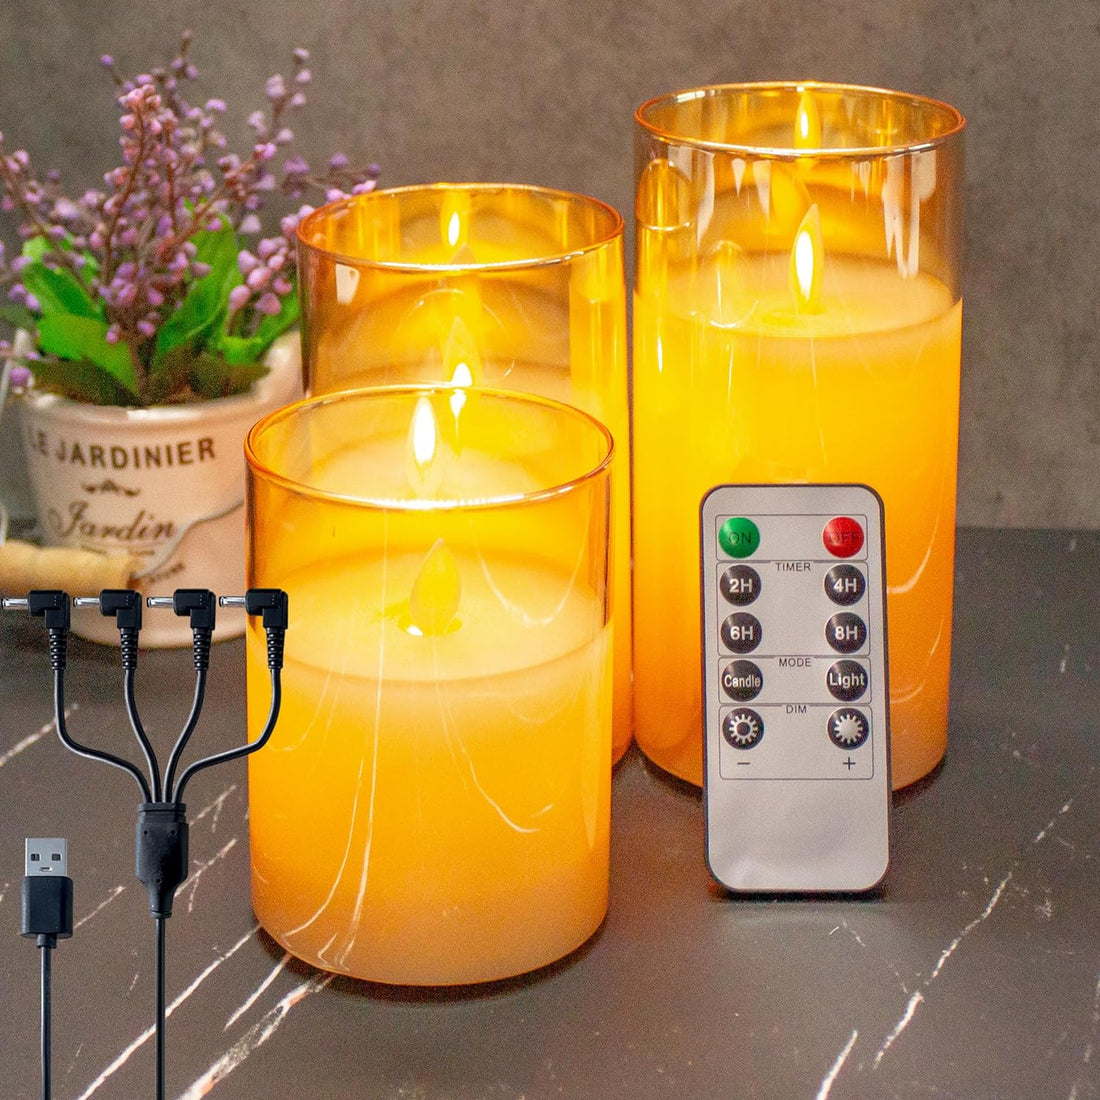 LEDHOLYT Flameless Candle Set, Flickering LED Pillar Candle with Remote Control and Timer, Upgraded Swing Wick, Built-in Battery Rechargeable Teal Glass Electronic Candles, Set of 3